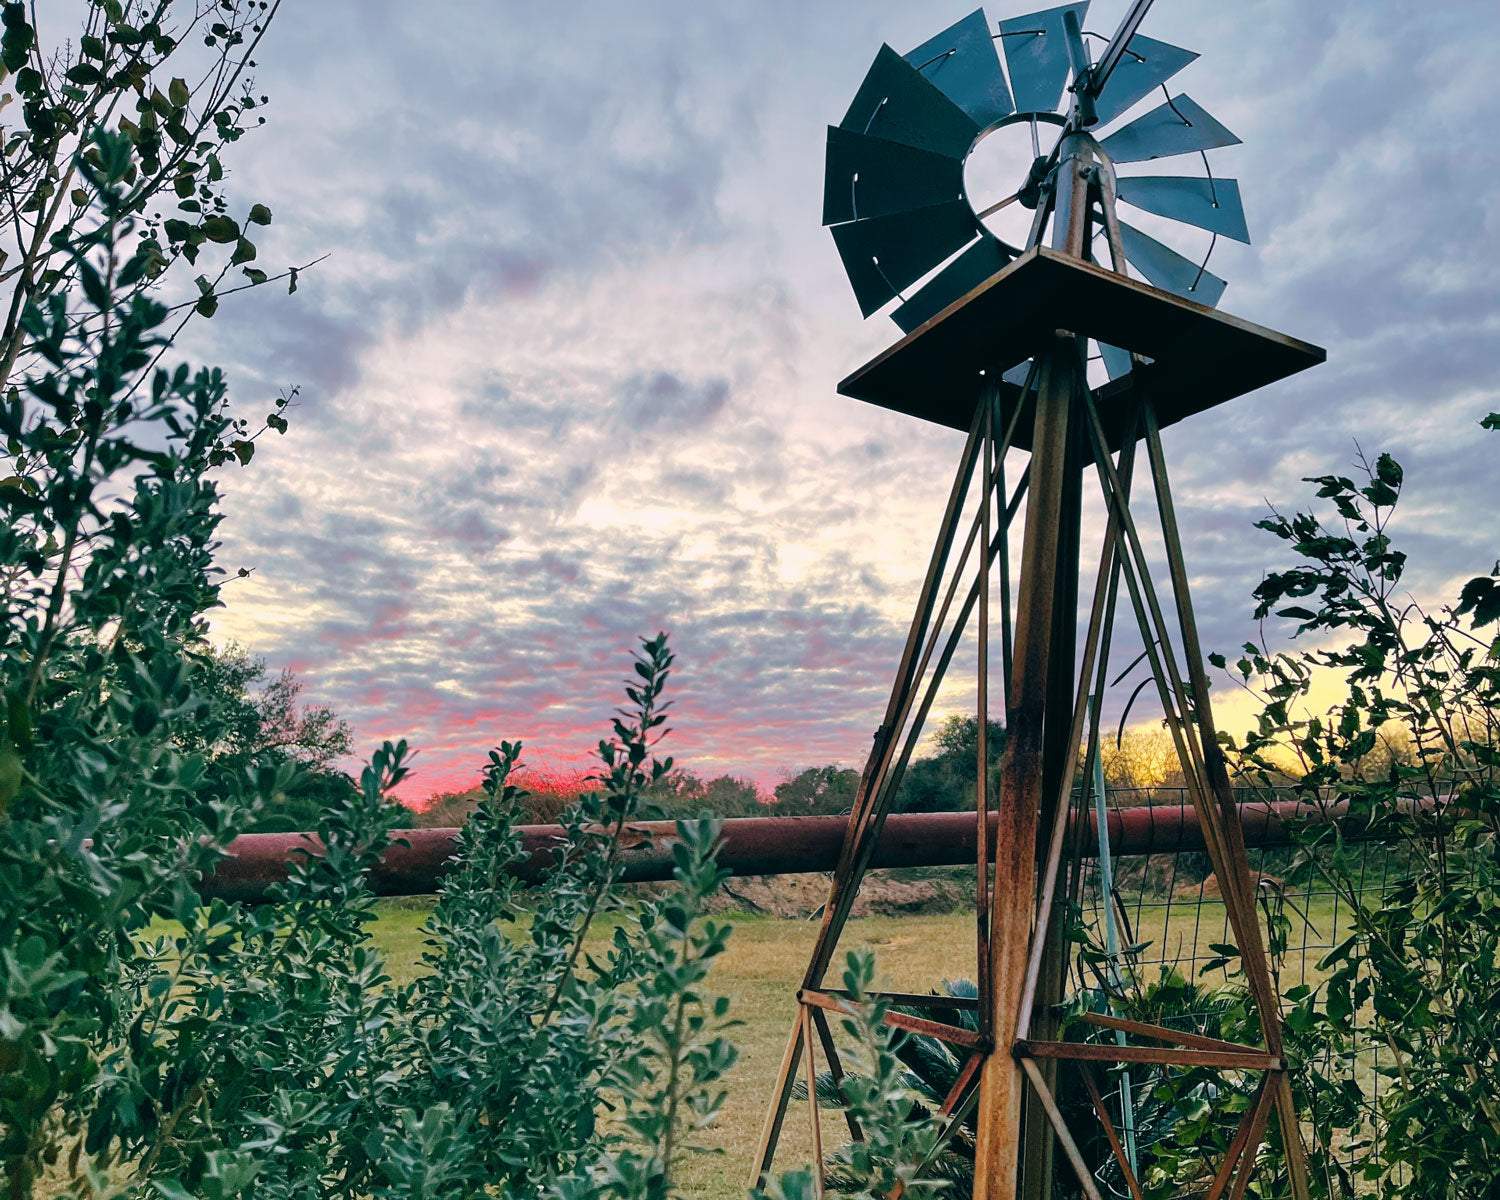 Texas Windmill Sunset - Artist by Texas Gypsy Style - Art Prints, Decoupage Rice Paper, Flat Canvas Prints, Giclee Prints, Photo Prints, Poster Prints